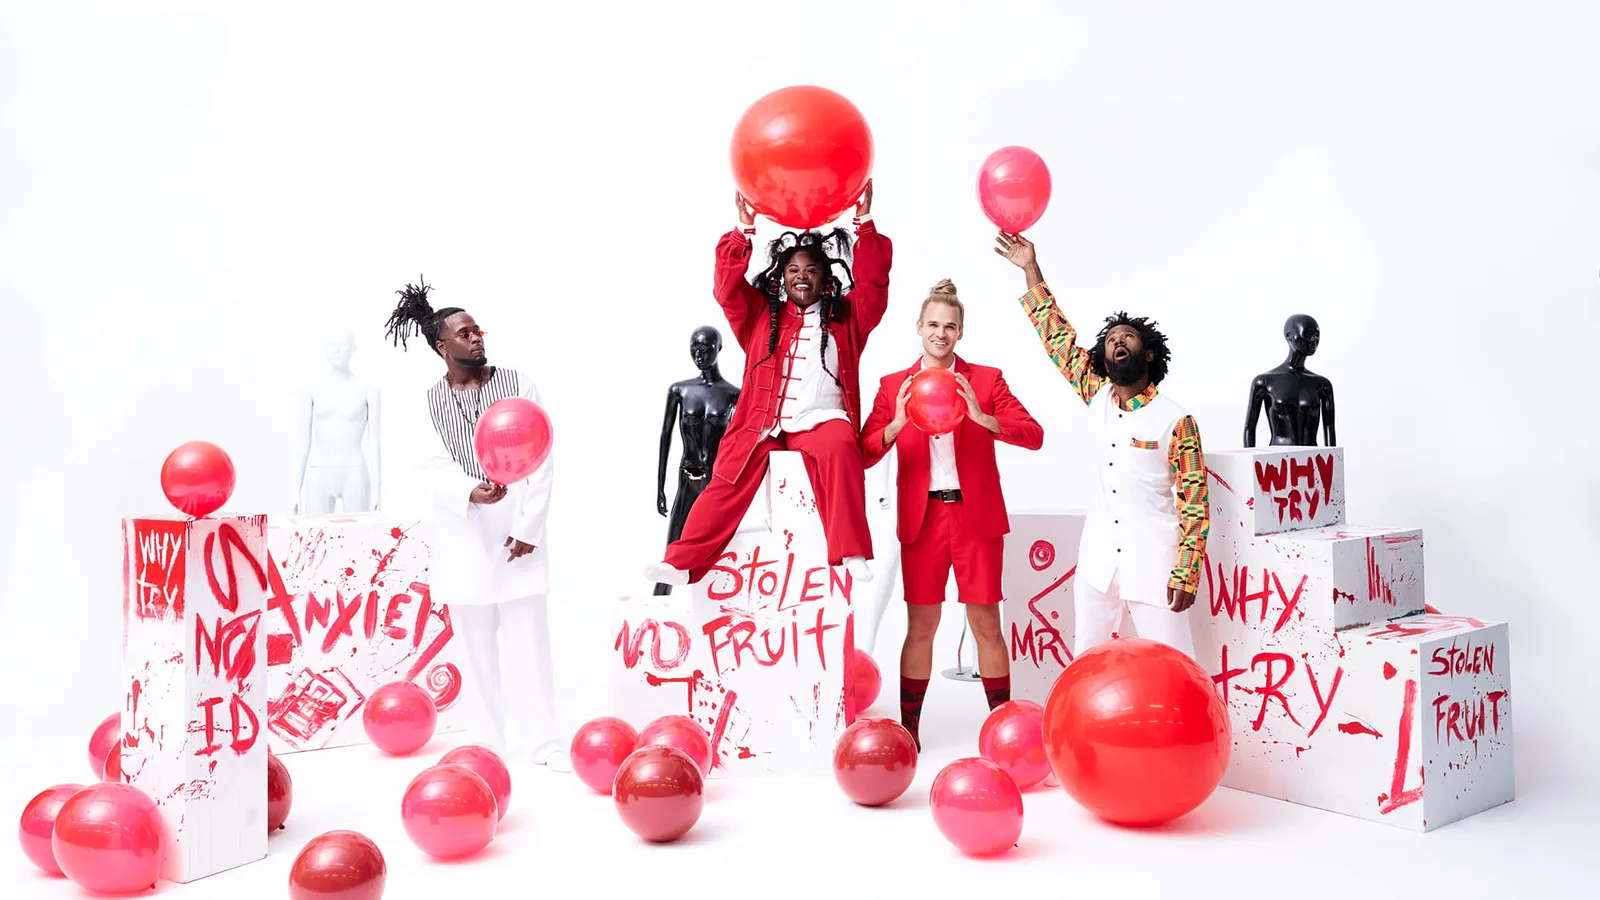 Music group Tank and the Bangas pose, smiling and laughing in a white room with big red balloons strewn everywhere.